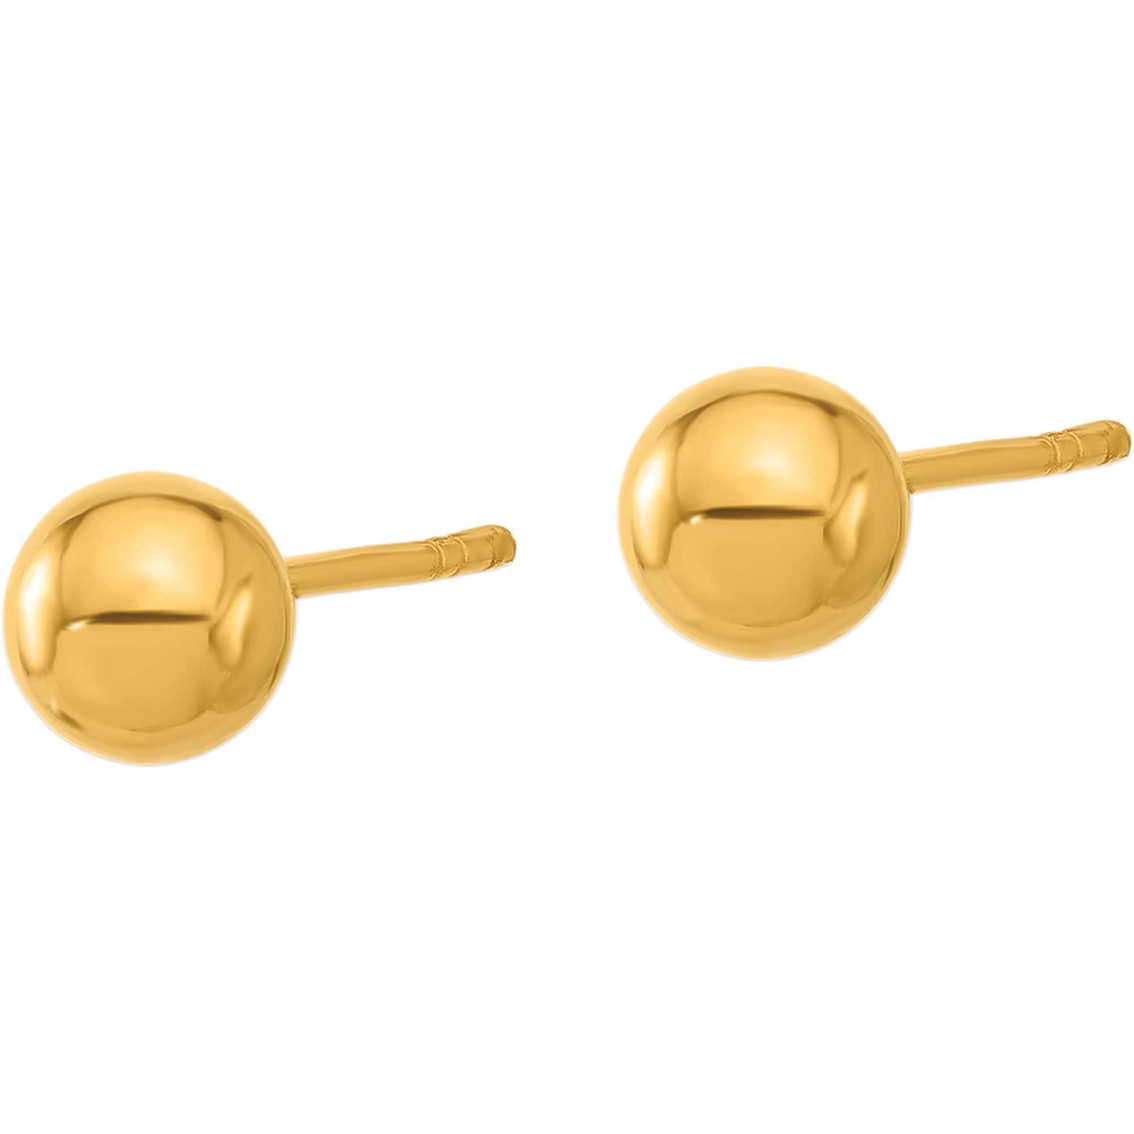 24K Pure Gold 6mm Ball Stud Earrings - Image 2 of 3